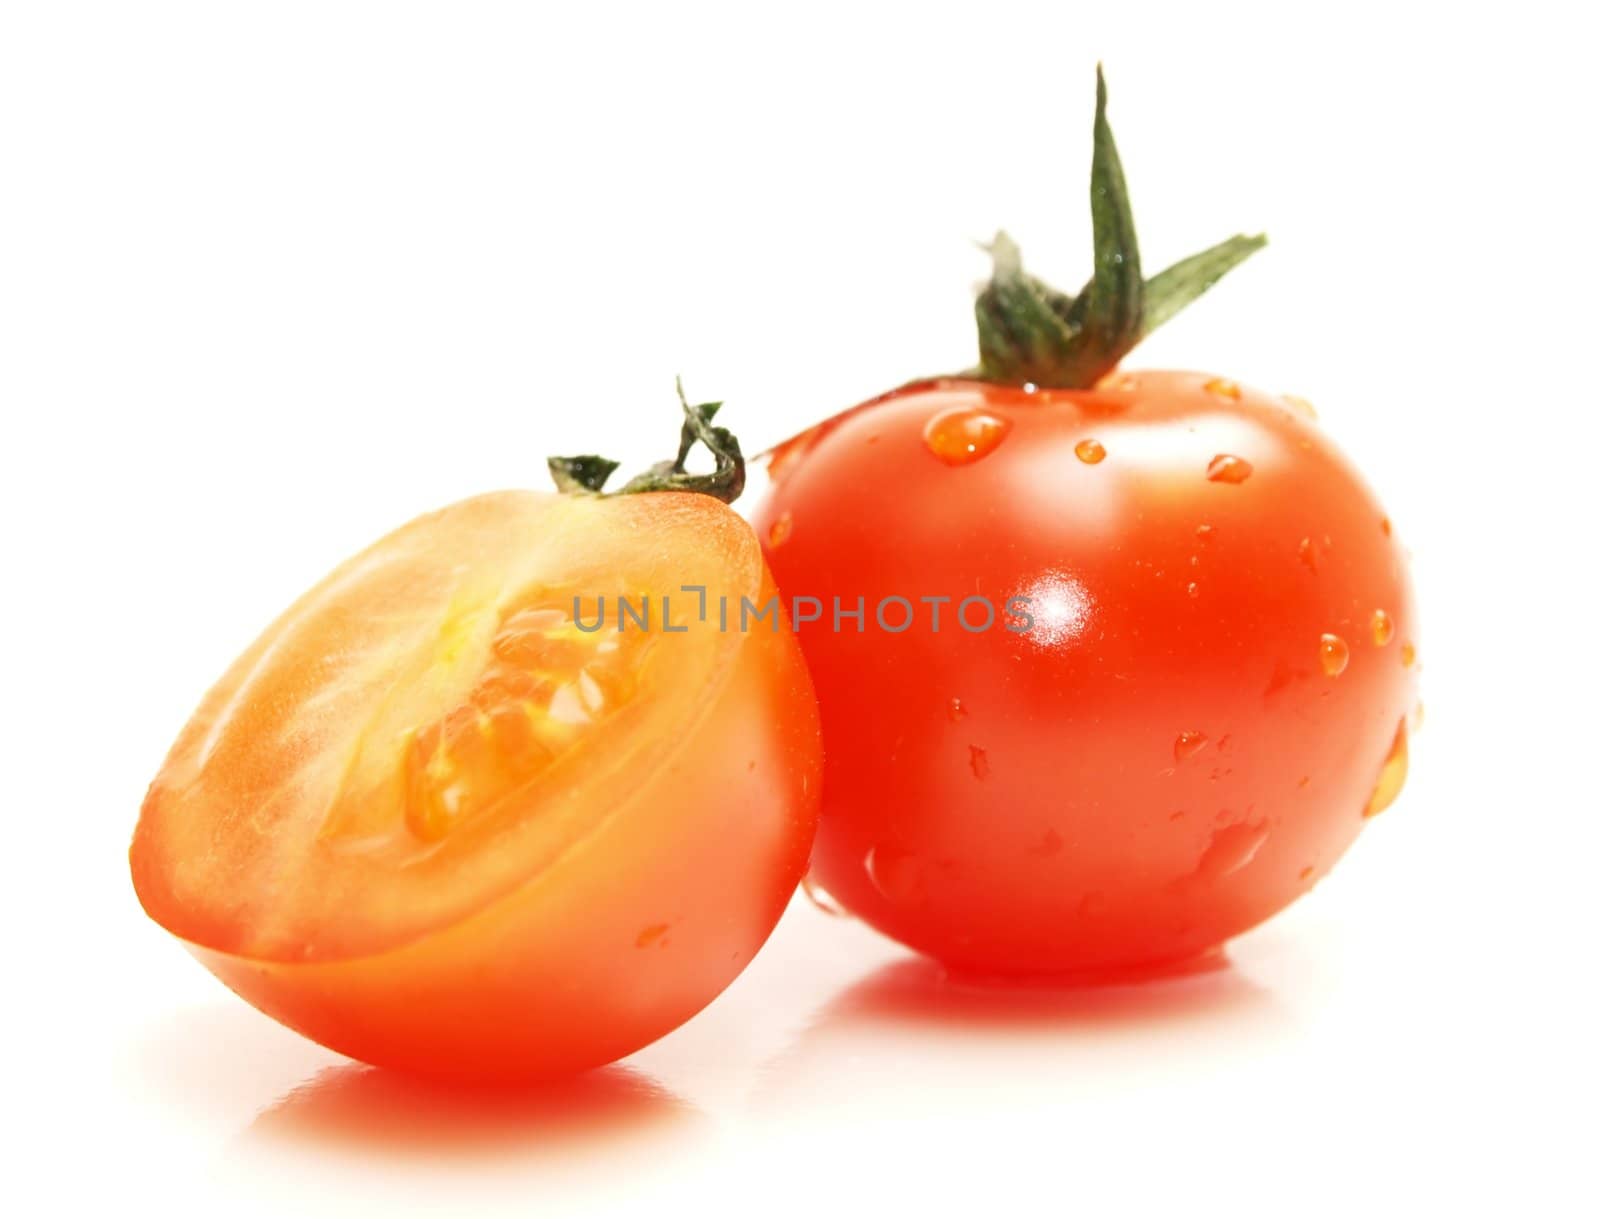 Fresh red tomato toward white background with green grass on top